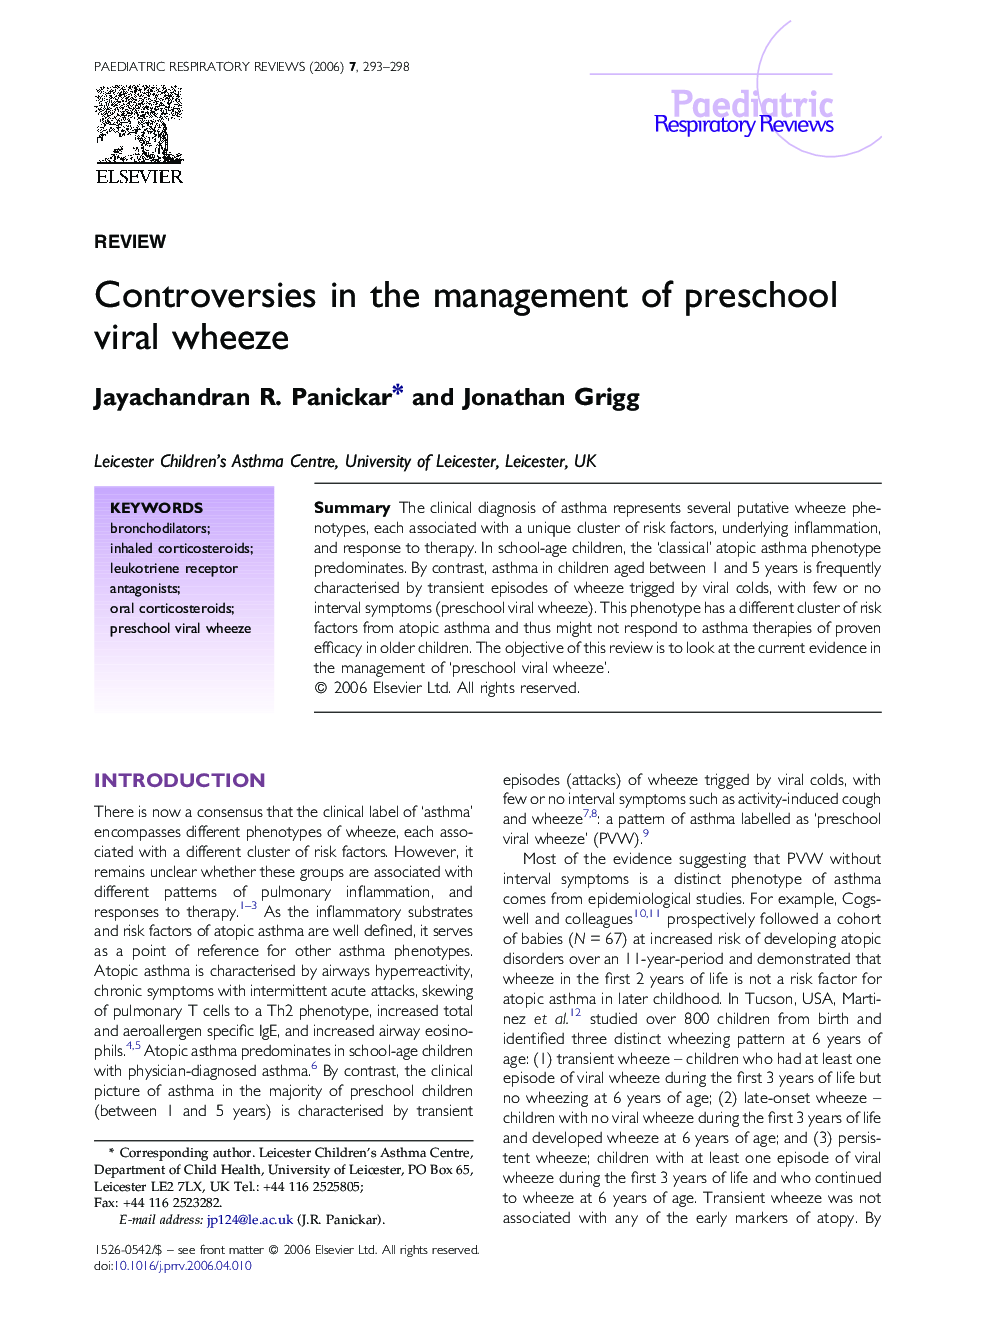 Controversies in the management of preschool viral wheeze